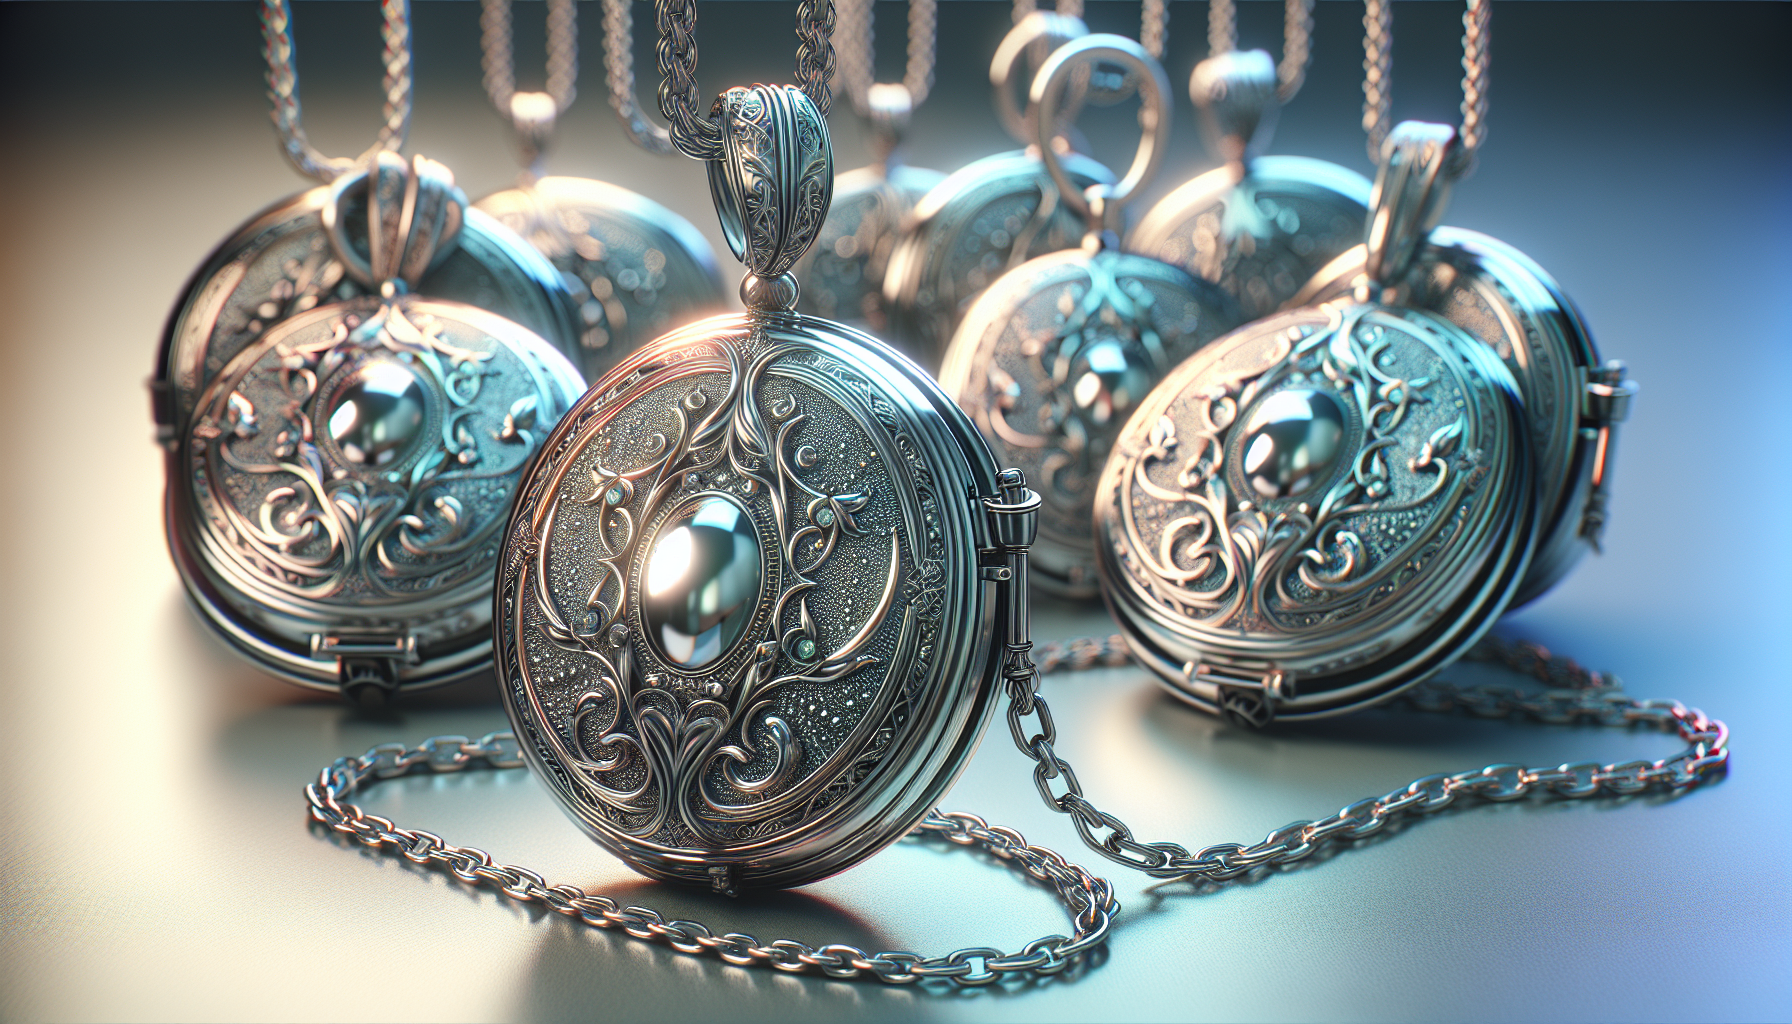 A detailed and stunning visualization of silver locket pendants, hanging with elegance and grace. They shimmer in the subtle light, reflecting alluring and captivating hues that draw attention immedia